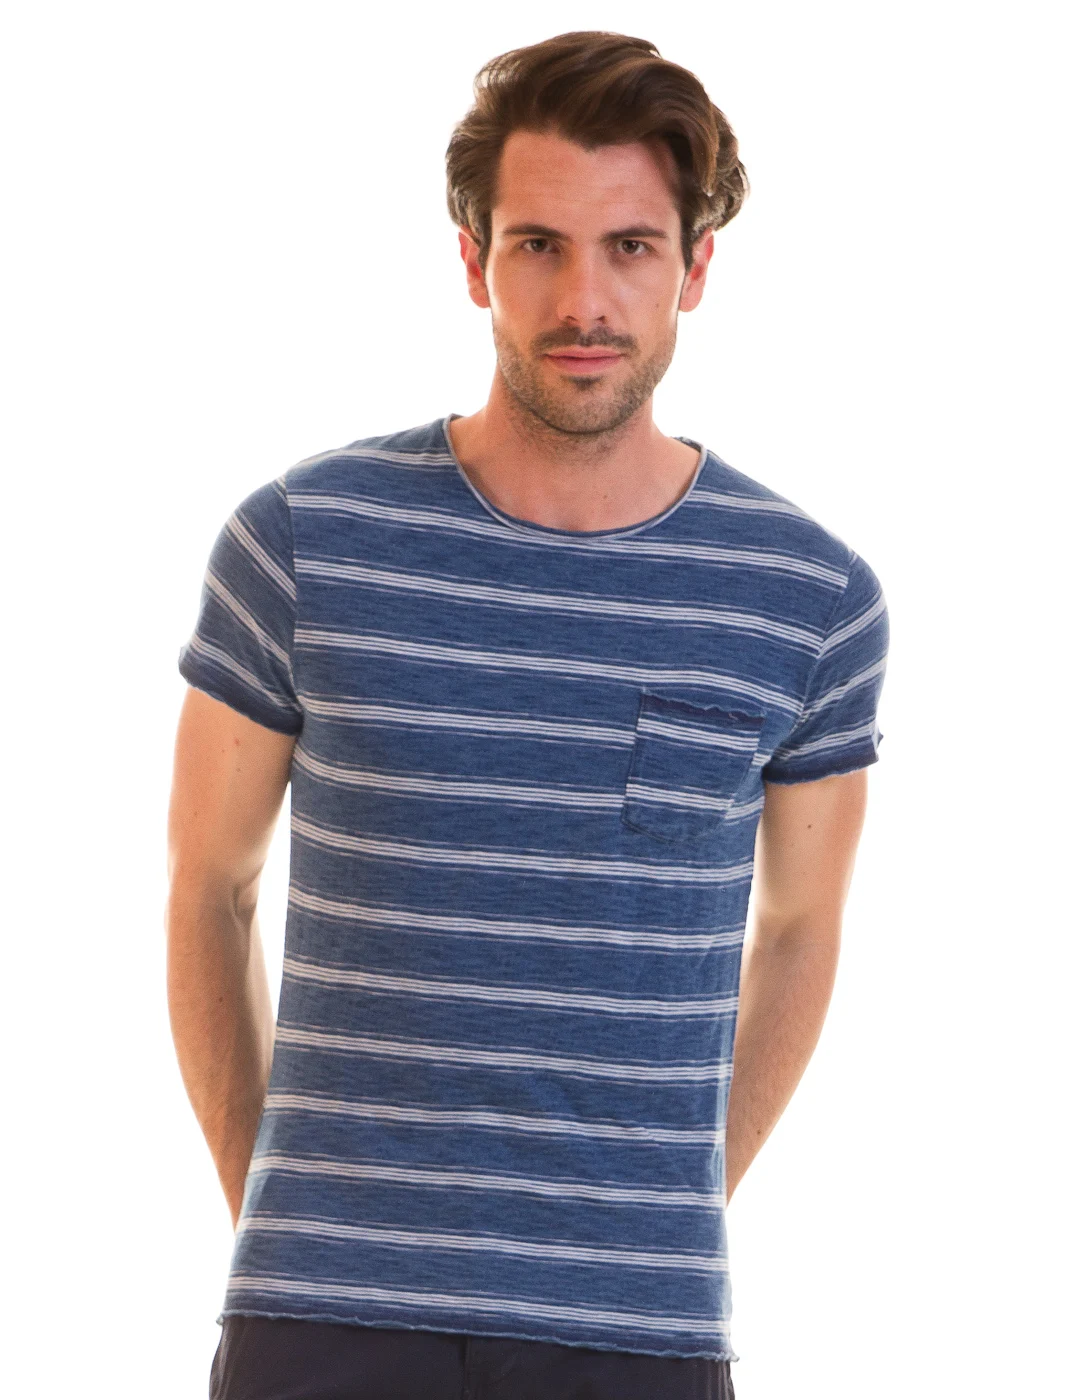 Blue striped t shirt by Blend-in T-Shirts from Men's Clothing on ...